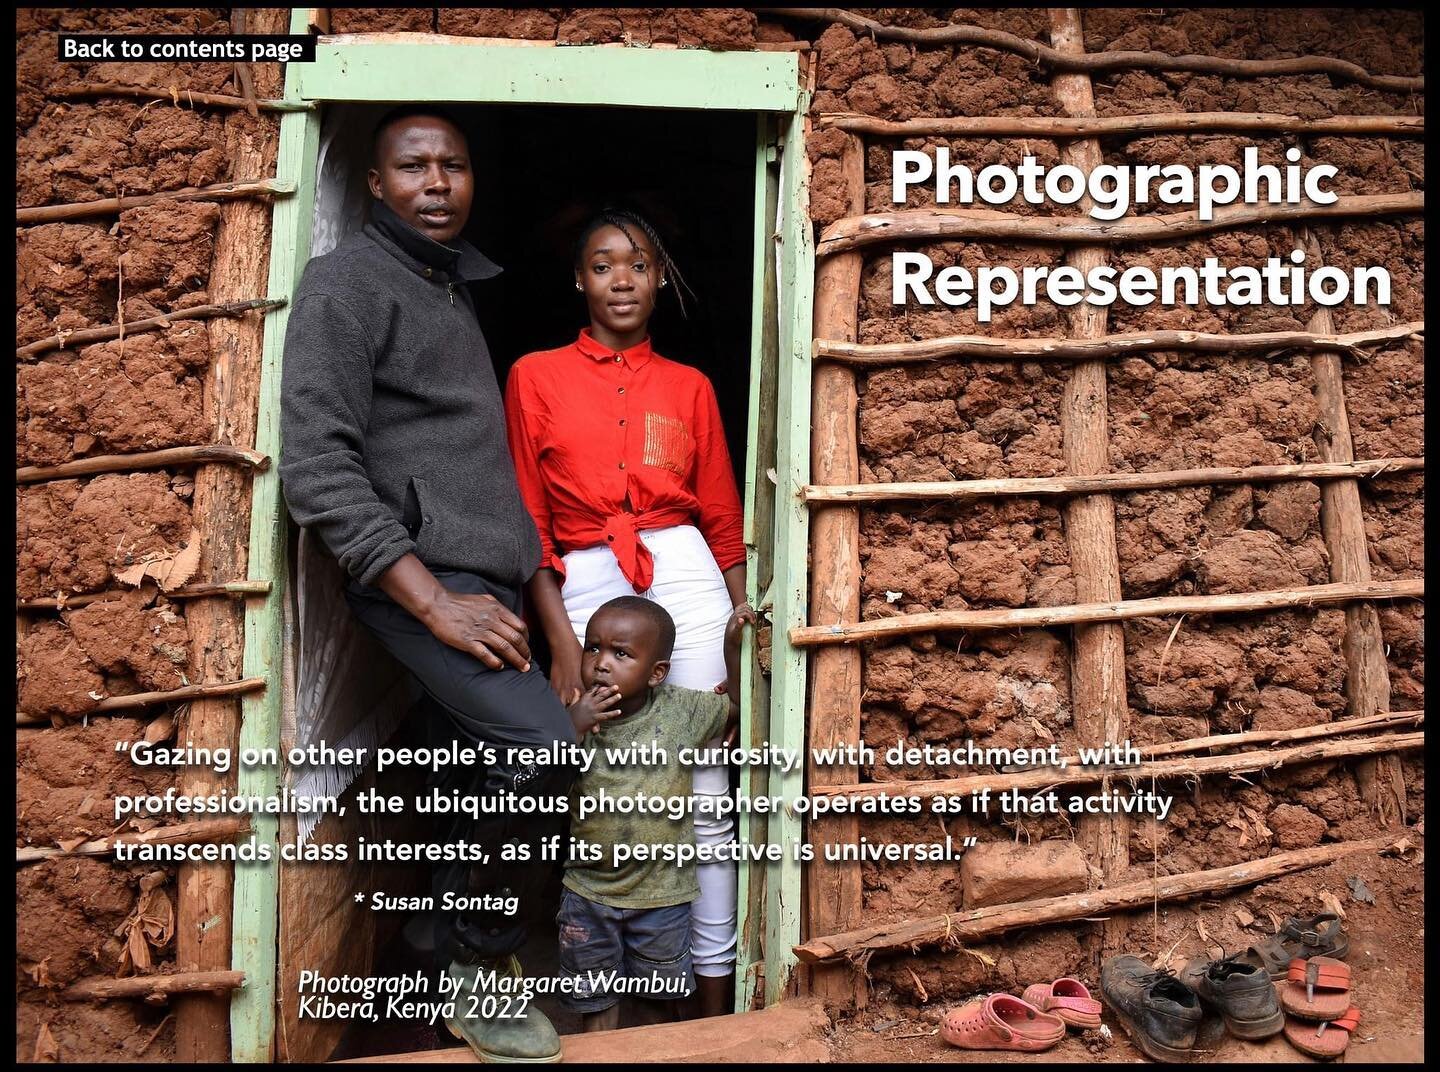 So proud to use a photograph taken by one of the gifted students at the Kibera School for Girls, in the newest edition of my Visual Communication eTextbook....
#shofco #nikonkenya #kibera #photographytraining #arteducation #portraitphotography #oneof